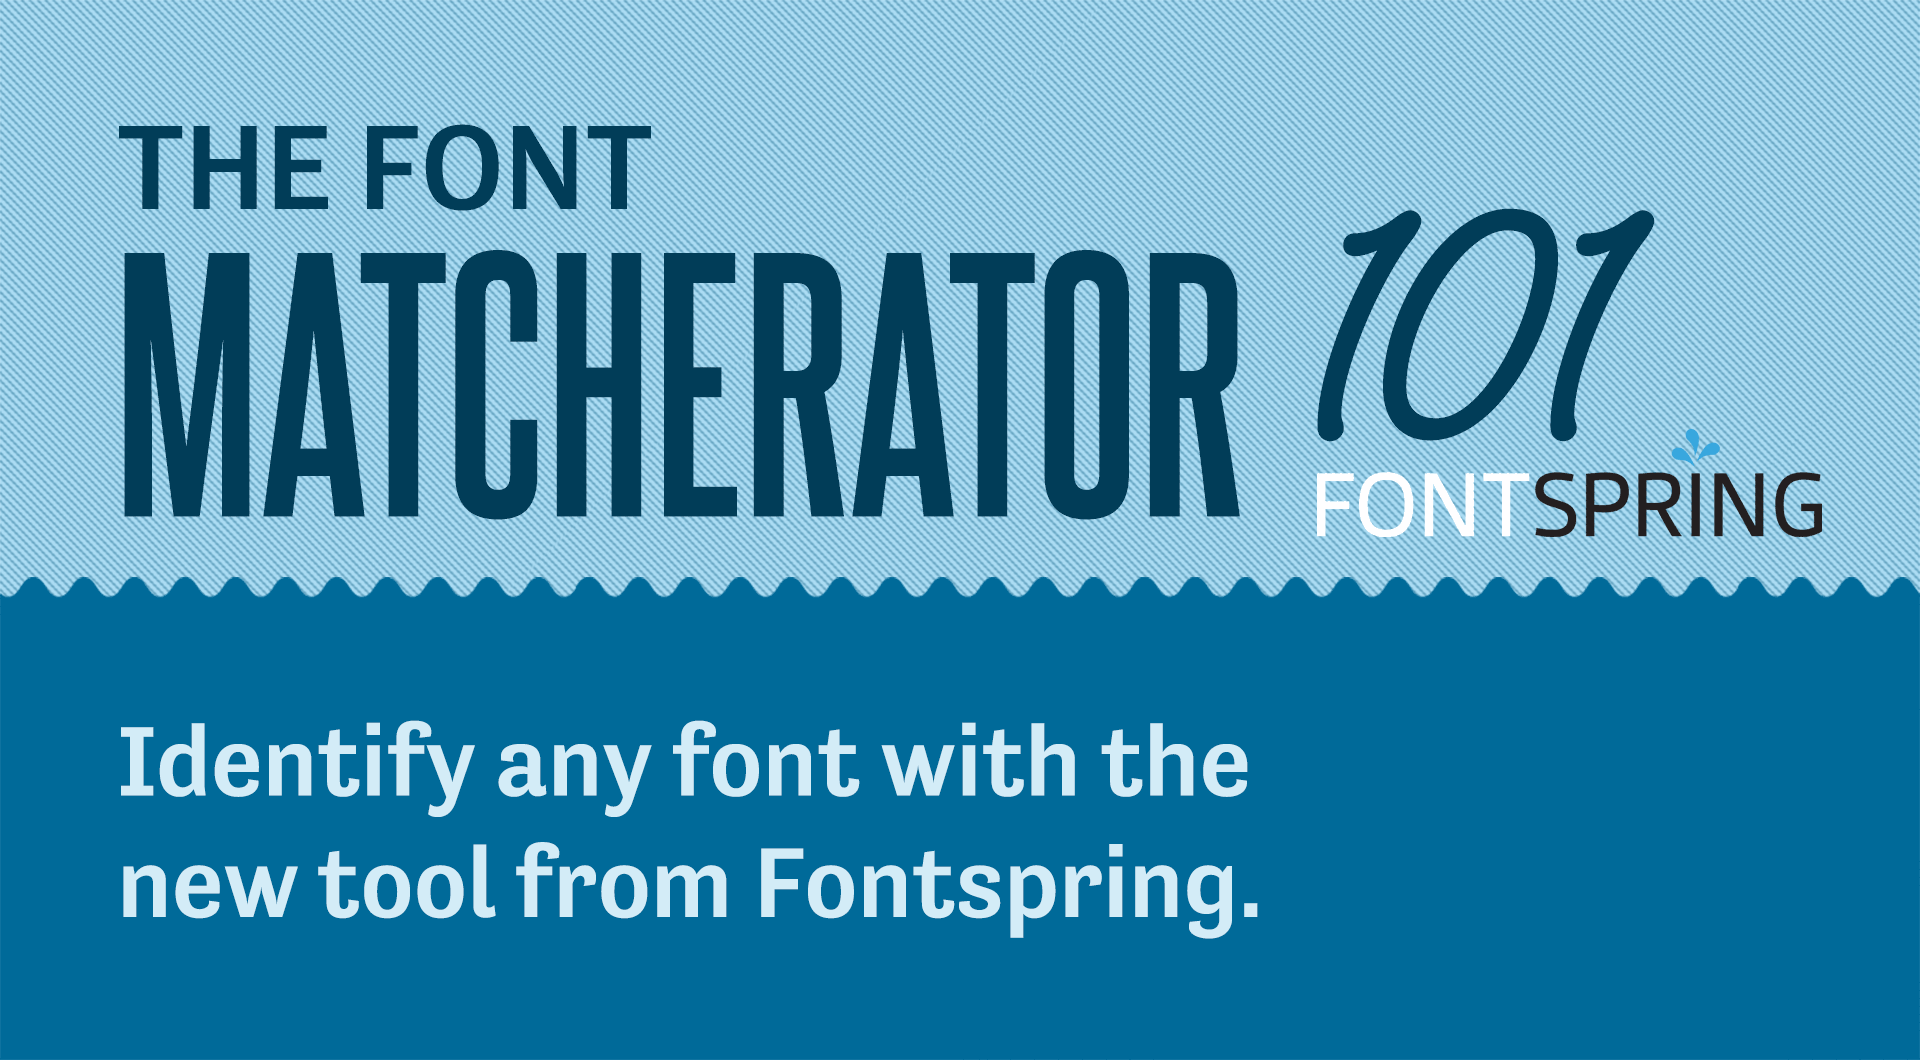 How to Match Fonts With the Matcherator